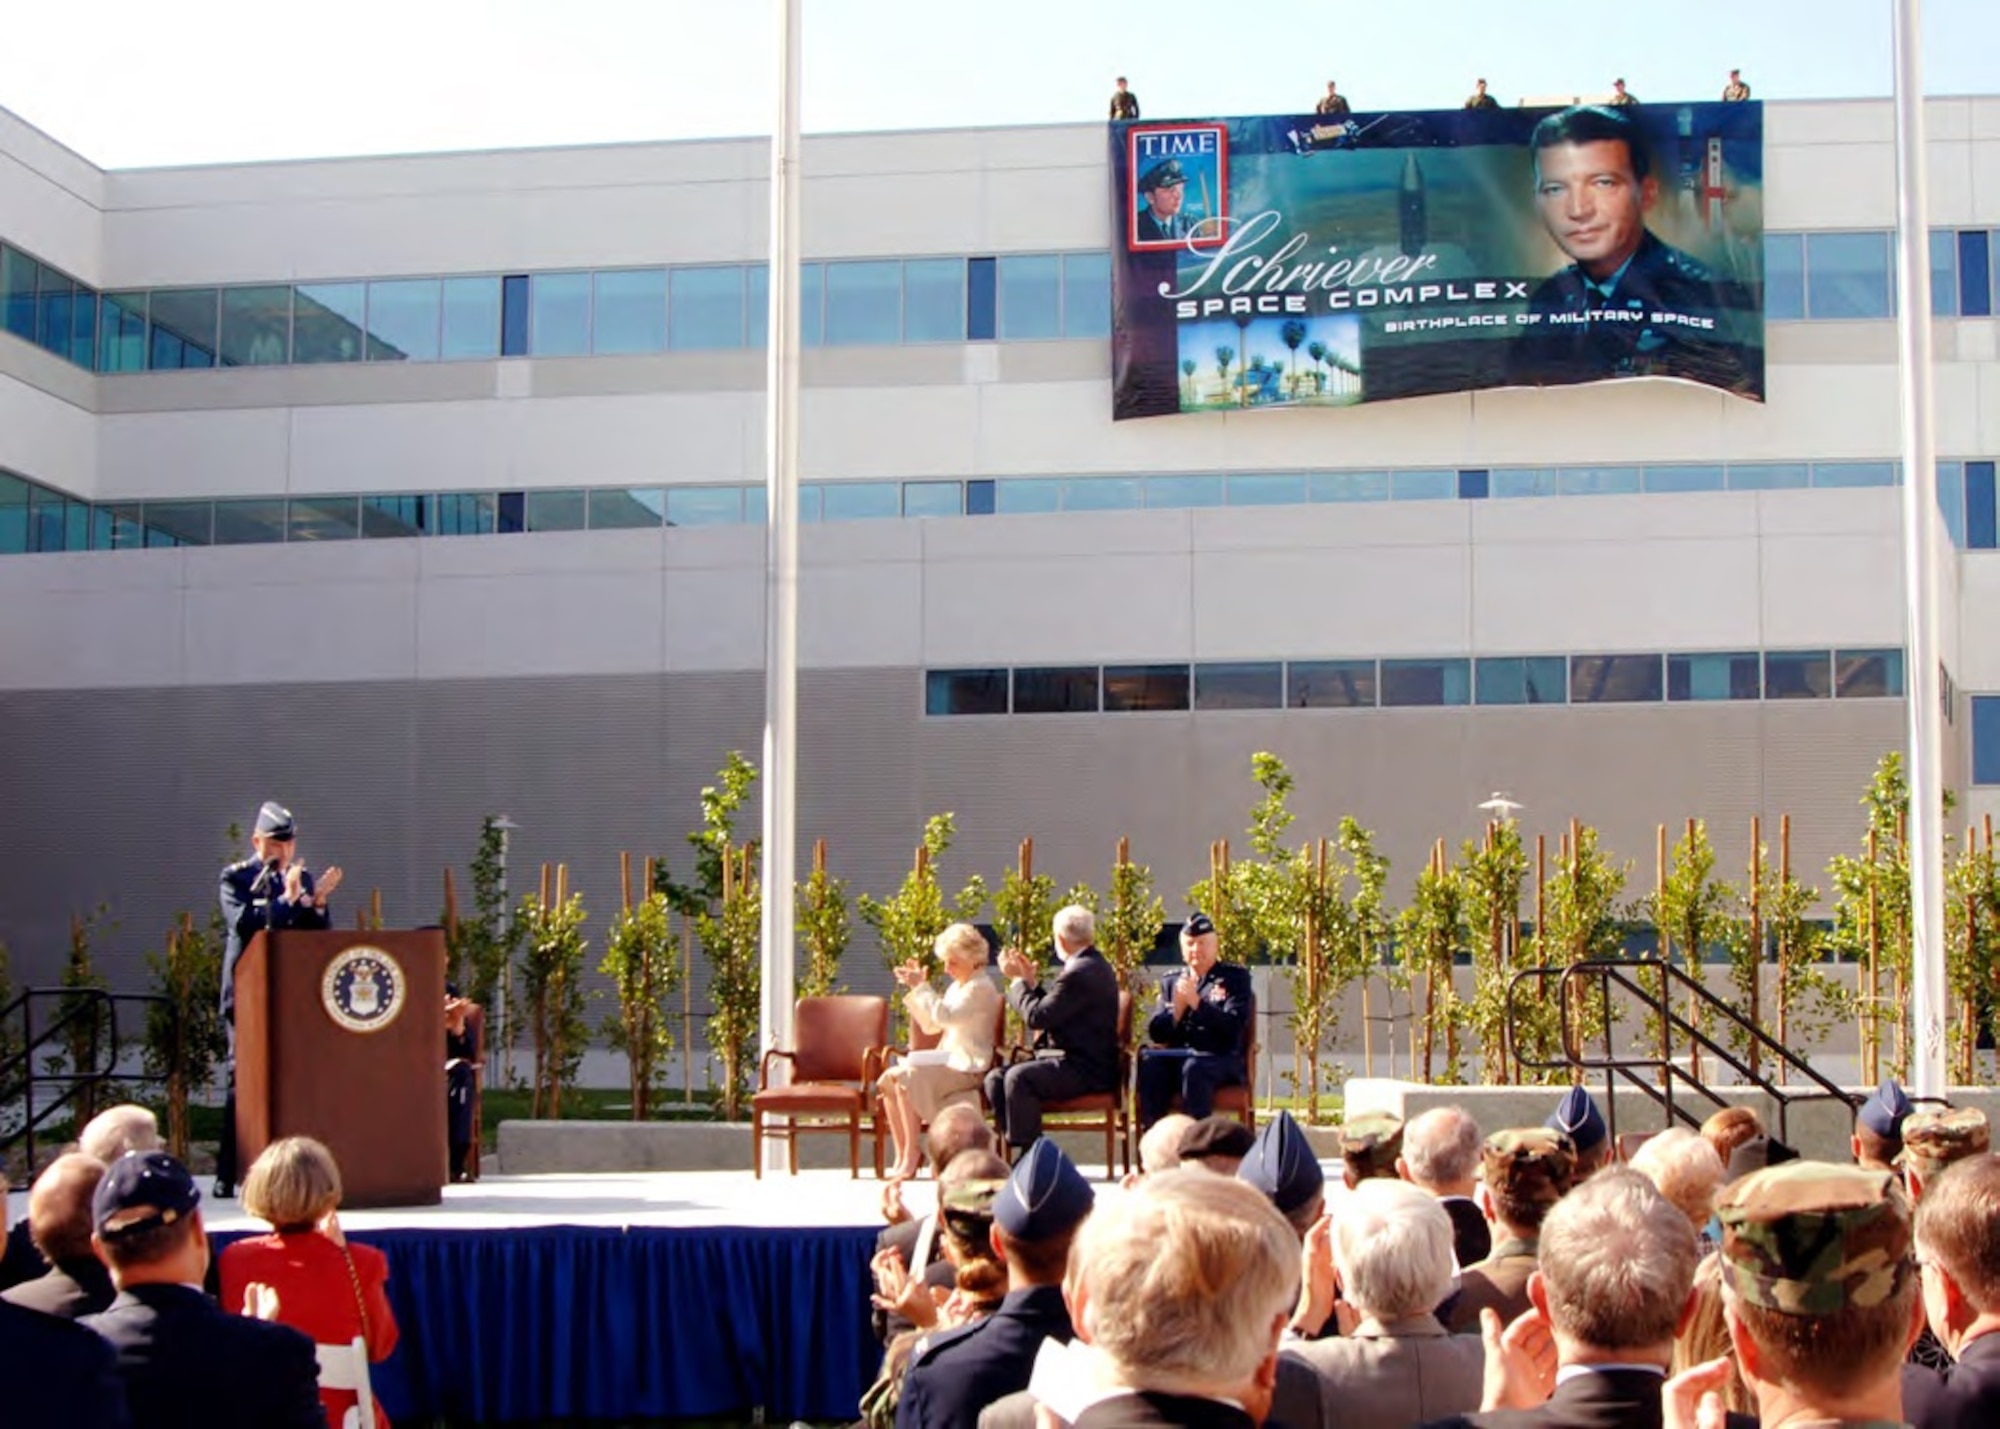 Maj. Gen. Michael Hamel, commander of Space and Missile Systems Center, presides over the dedication ceremony for the Schriever Space Complex transferring SMC’s headquarters from Area A to its new location on the northwest corner, former Area B of Los Angeles Air Force Base on Apr. 24, 2006. (U.S. Air Force photo)